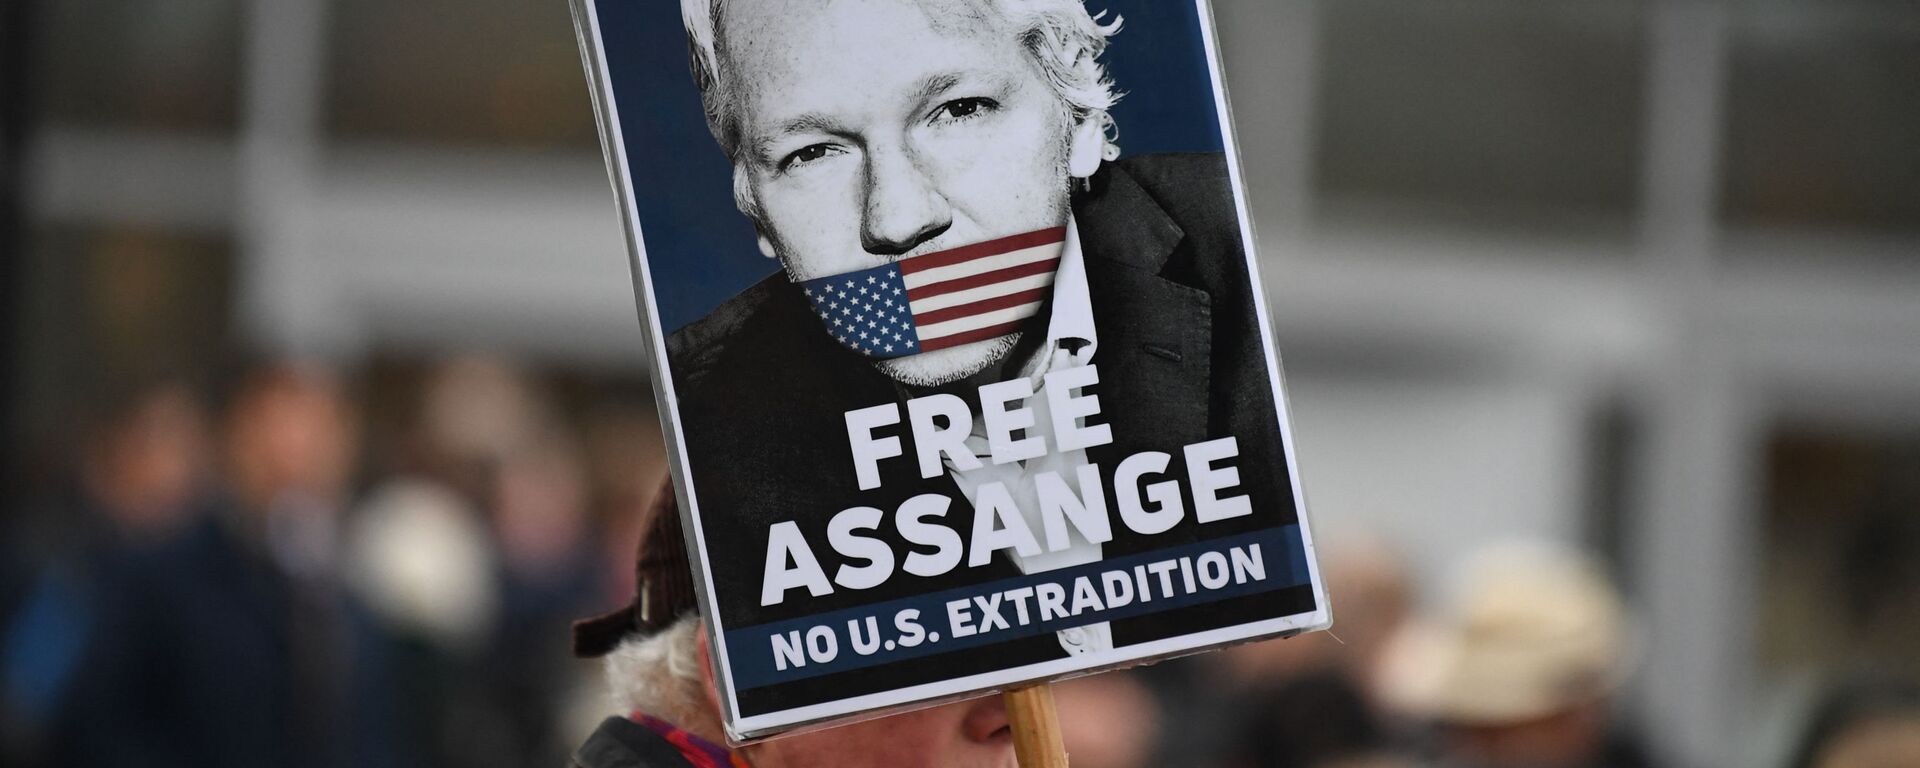 A supporter of WikiLeaks founder Julian Assange holds a placard calling for his freedom outside Woolwich Crown Court and HMP Belmarsh prison in southeast London on February 24, 2020, ahead of the opening of the trial to hear a US request for Assange's extradition - Sputnik International, 1920, 17.06.2022